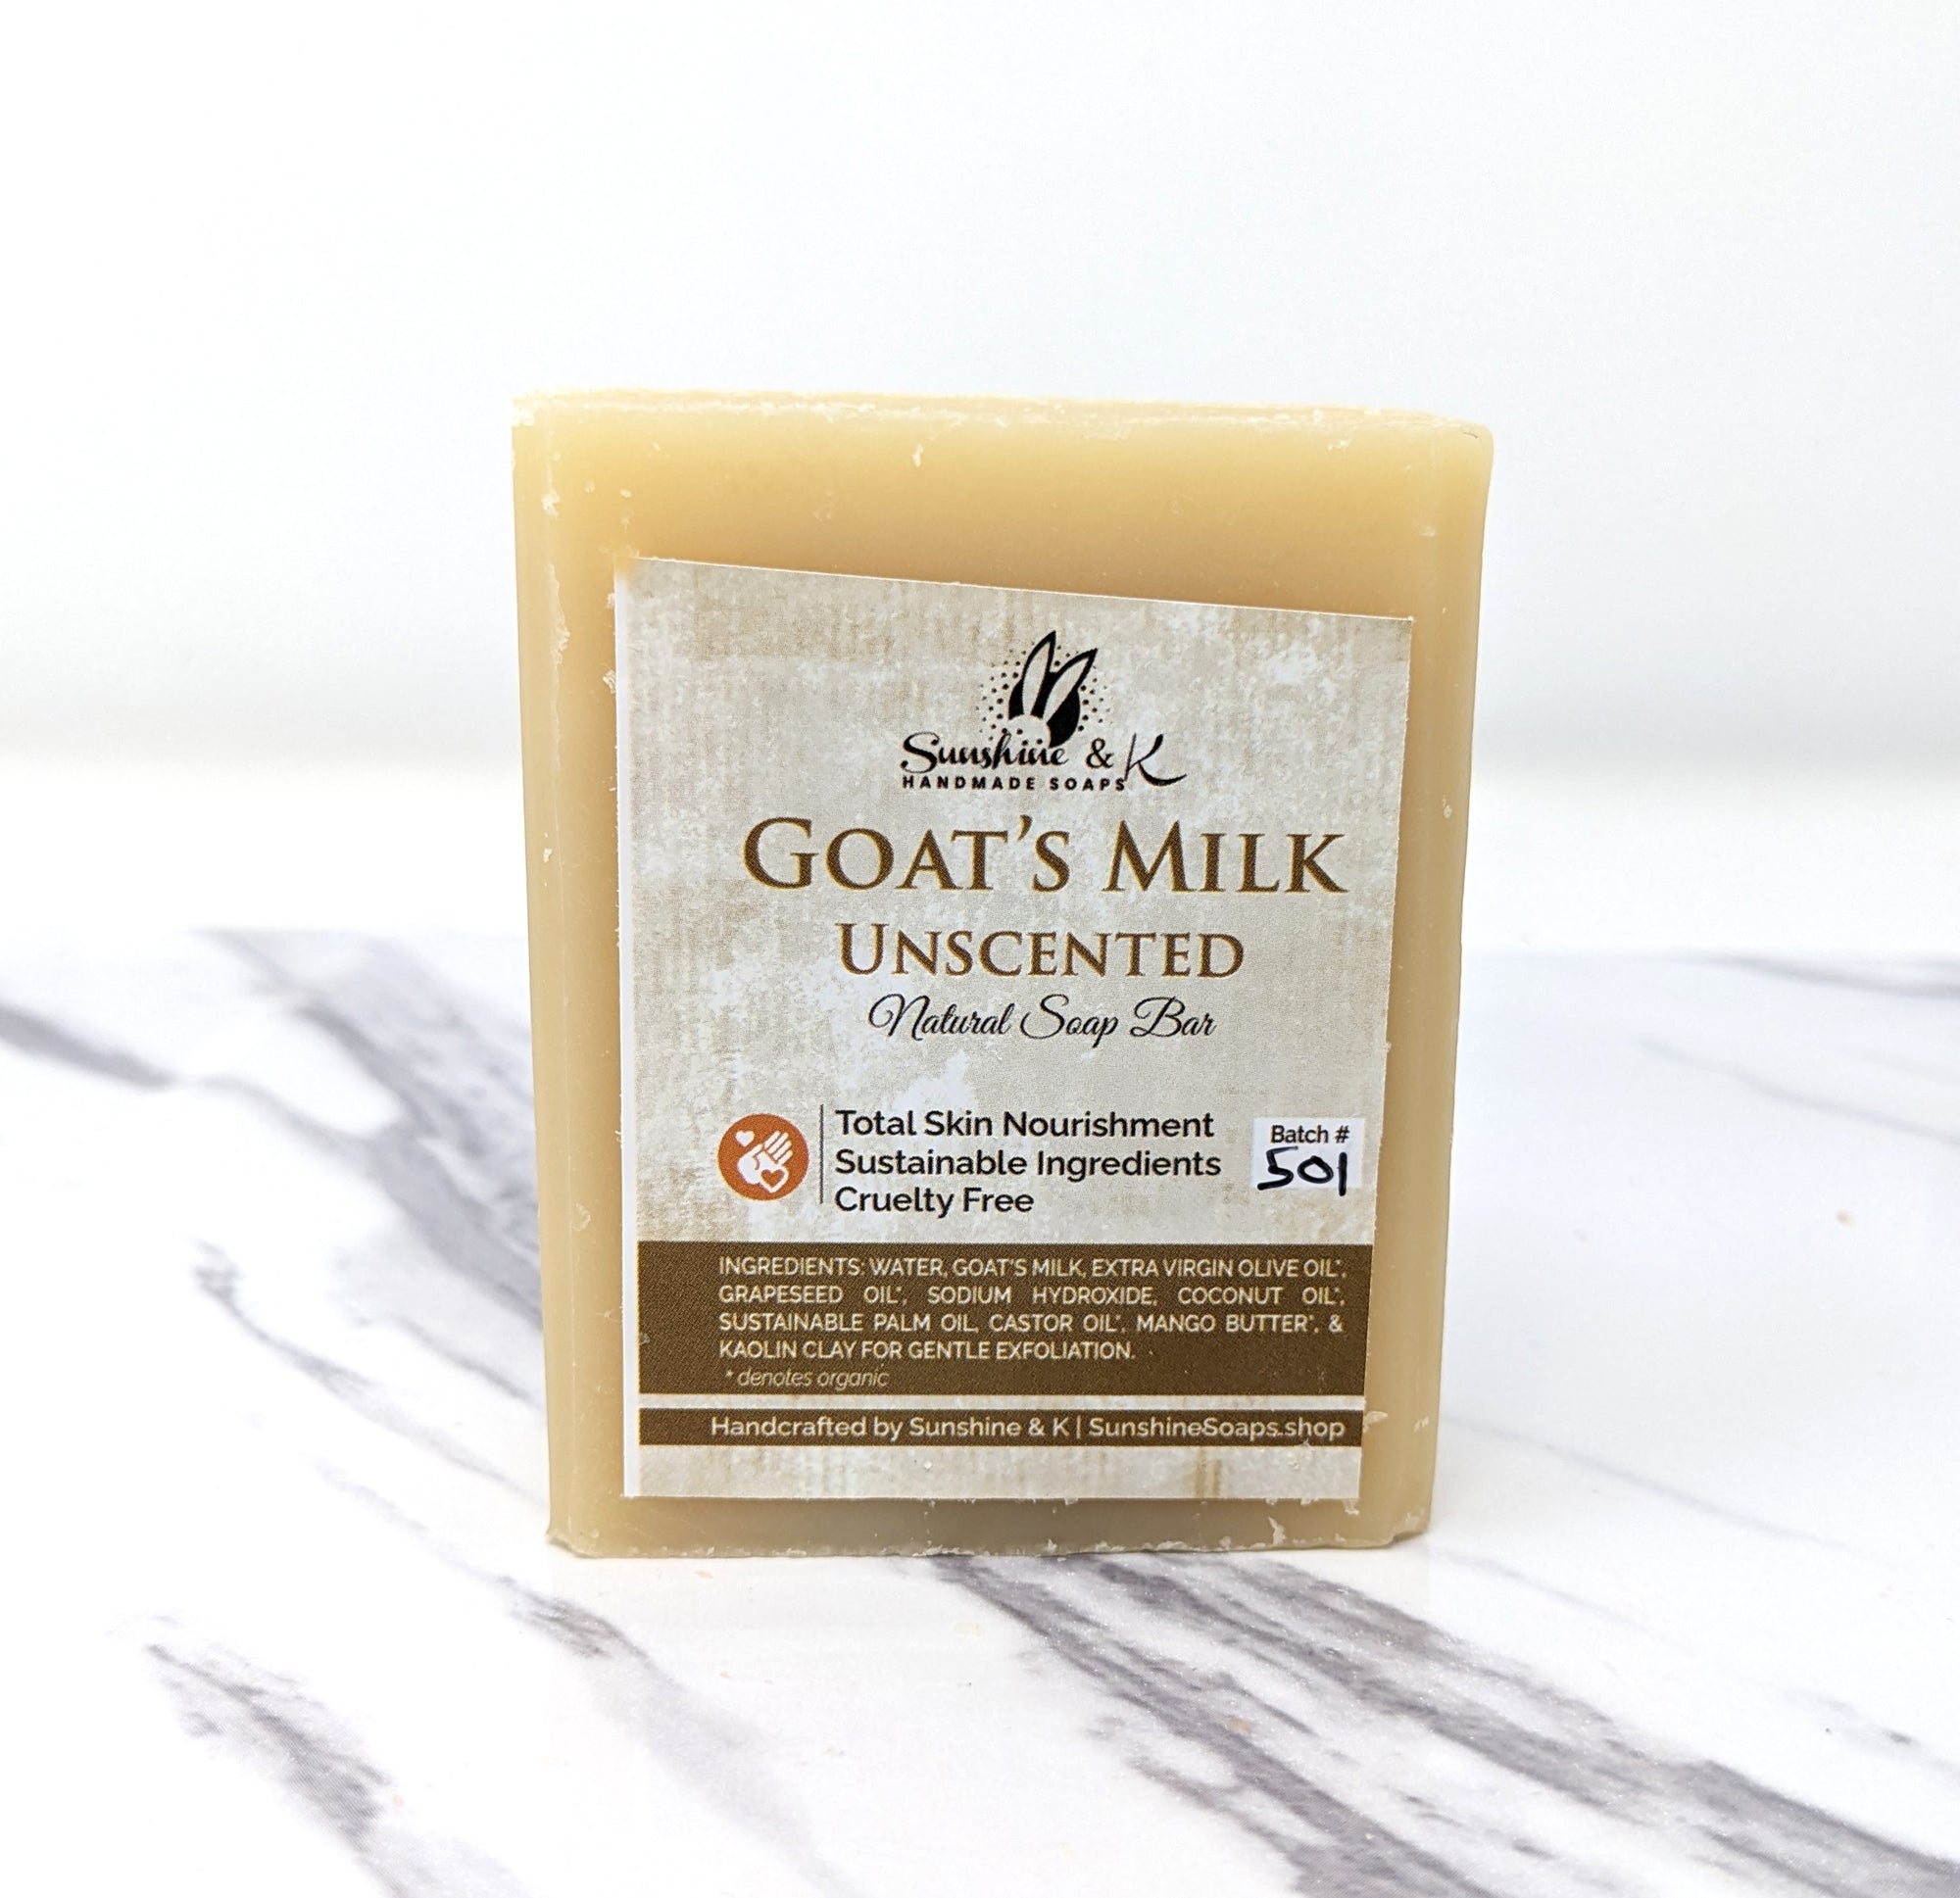 Unscented Goat's Milk Soap Bar – Natural Handmade Unscented Soap Bar - Creamy & Lathery